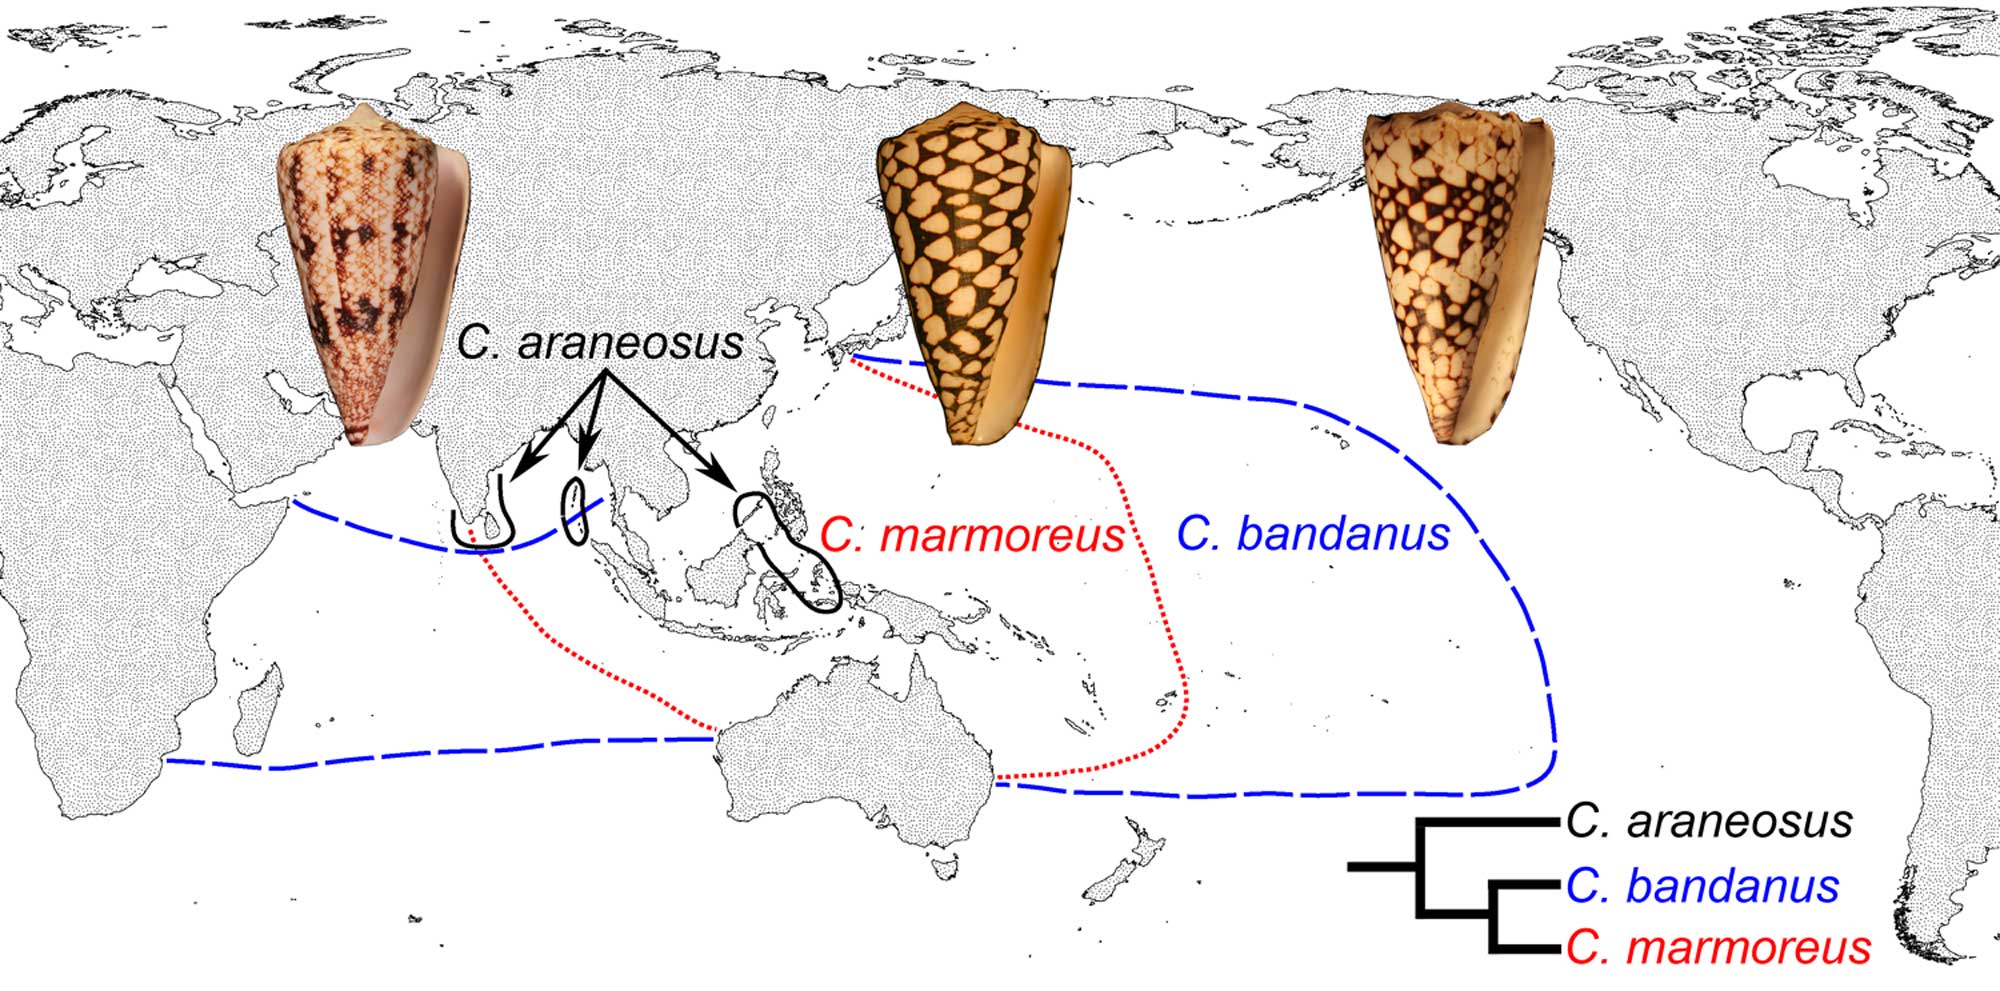 Image comparing the geographic ranges of three closely-related cone snail species, one of which has lecithotrophic development, and two of which have planktotrophic development.